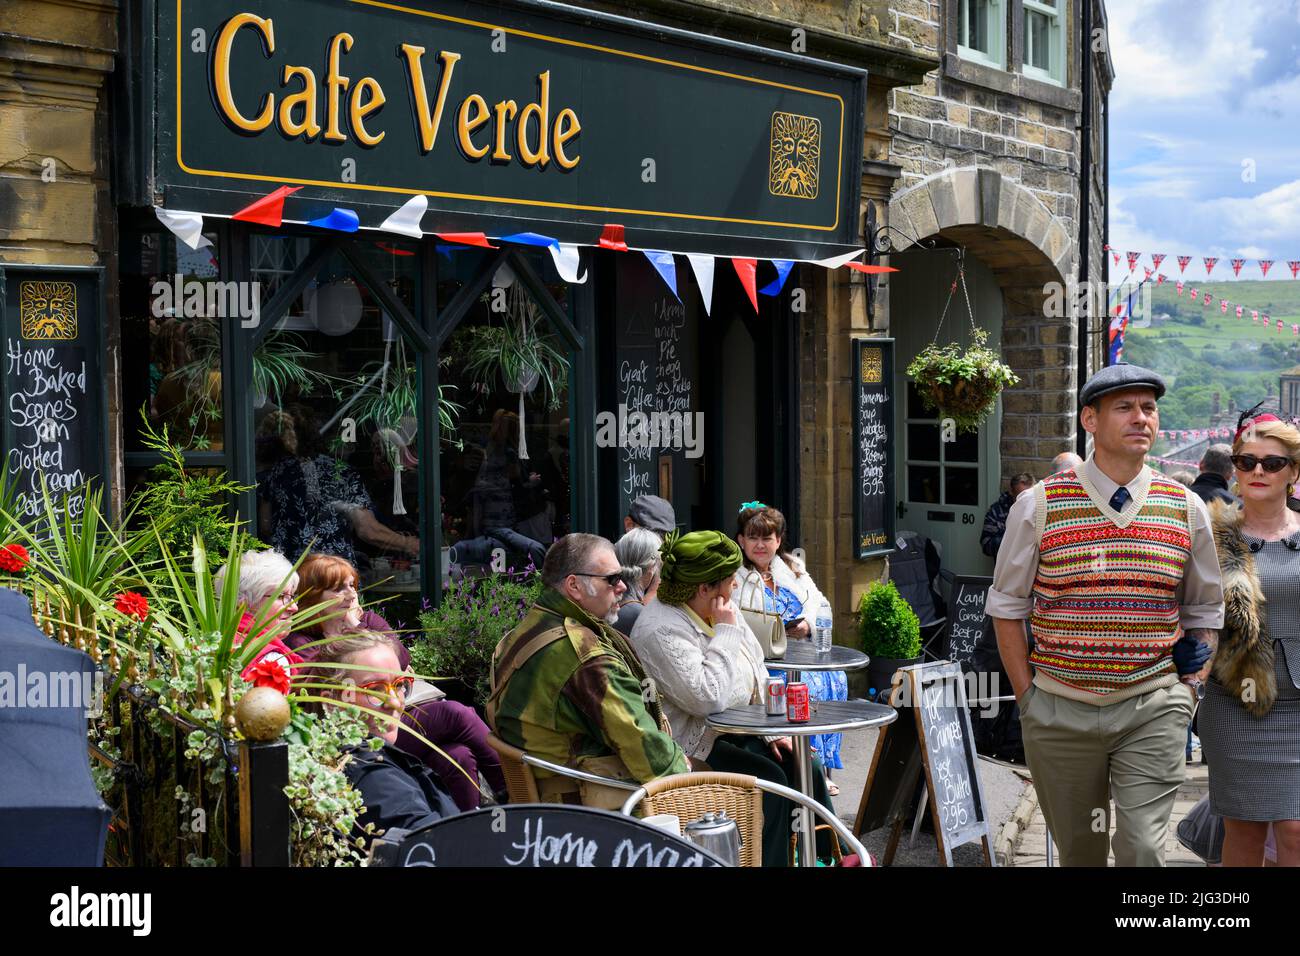 Haworth 1940 re-enactment living history event (re-enactors nostalgic day-out, tables & bunting, Cafe Verde) - Main Street, Yorkshire, England, UK. Stock Photo